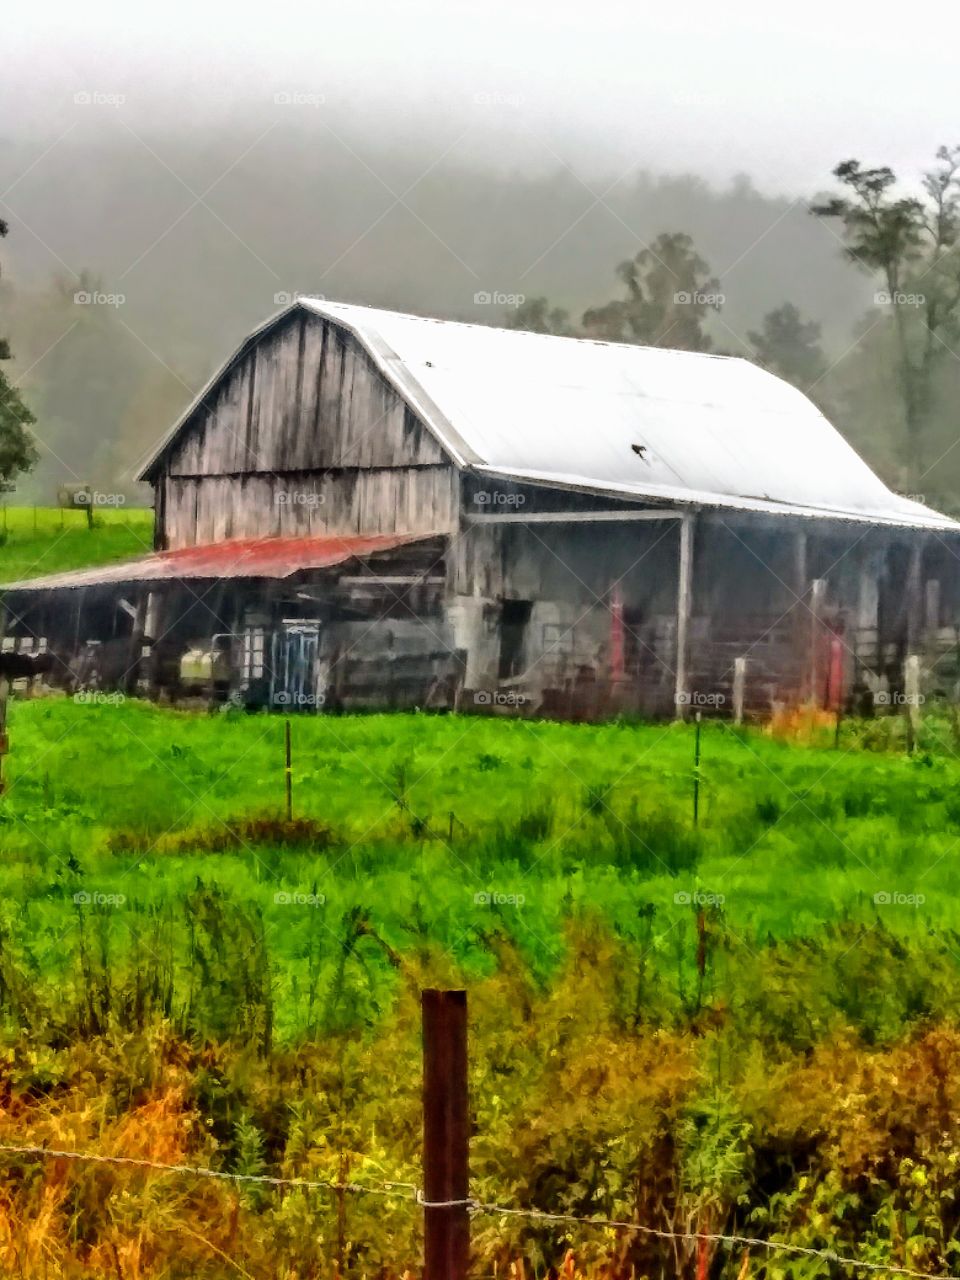 An old, dilapidated barn in the country on a rainy, foggy morning.